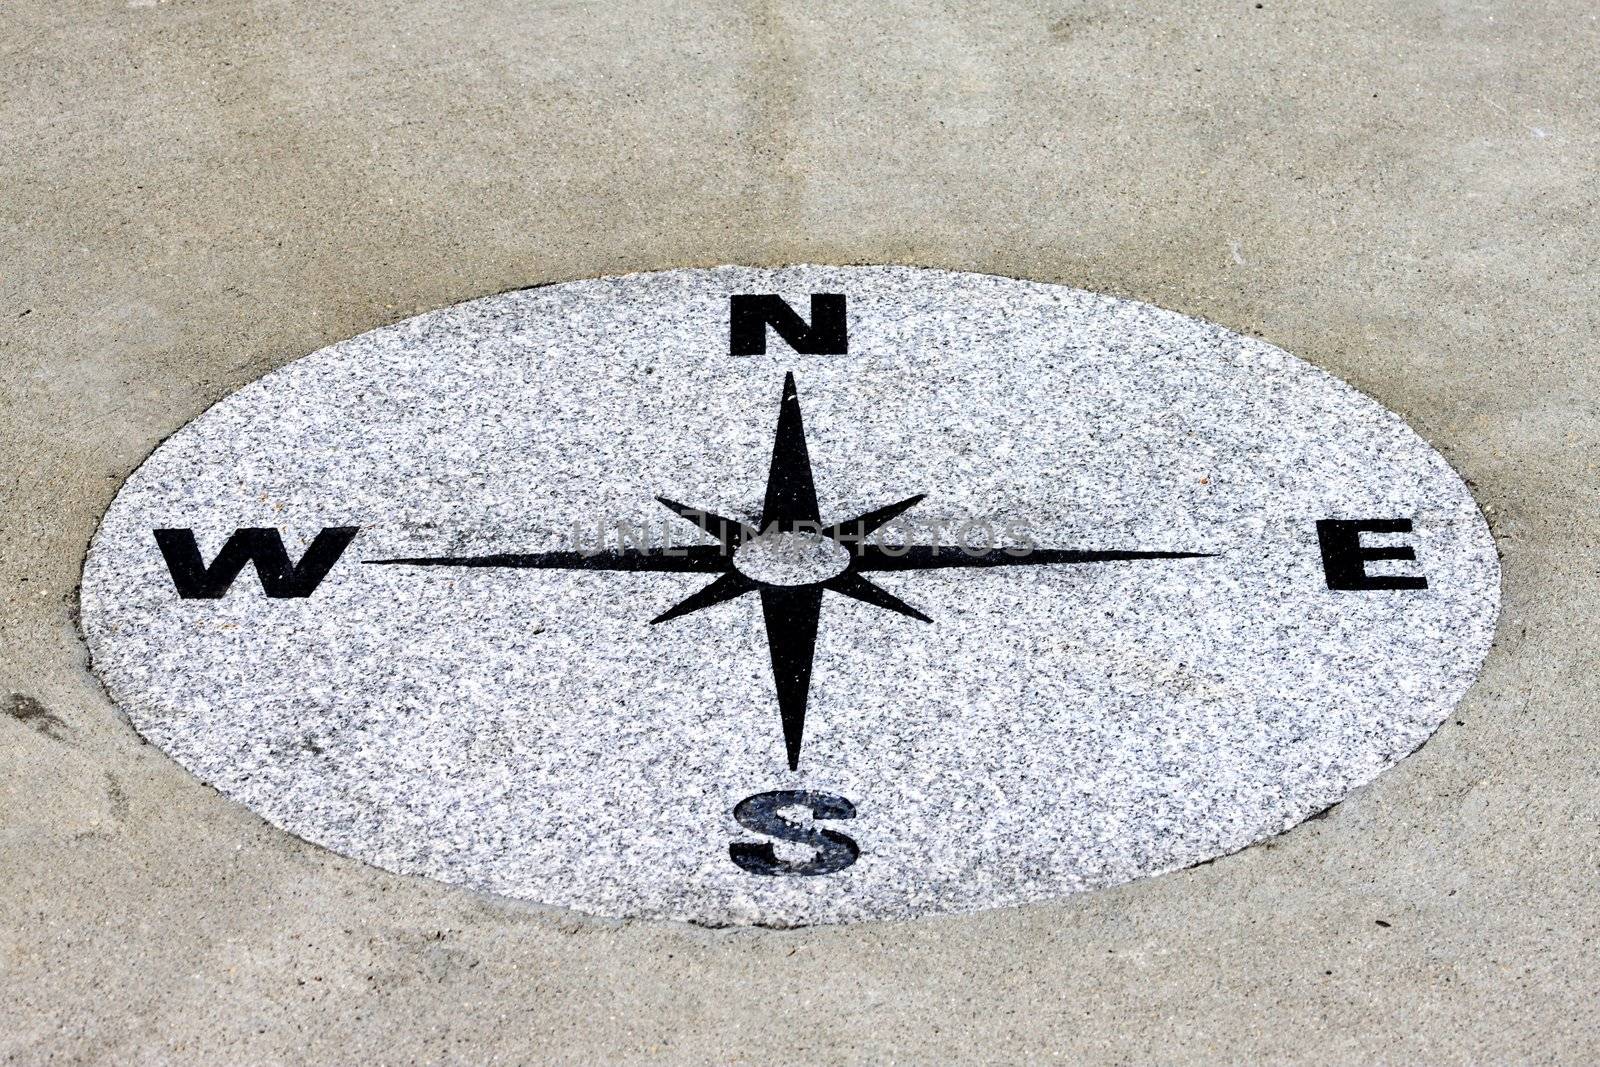 Compass found on a sidewalk on a granit background